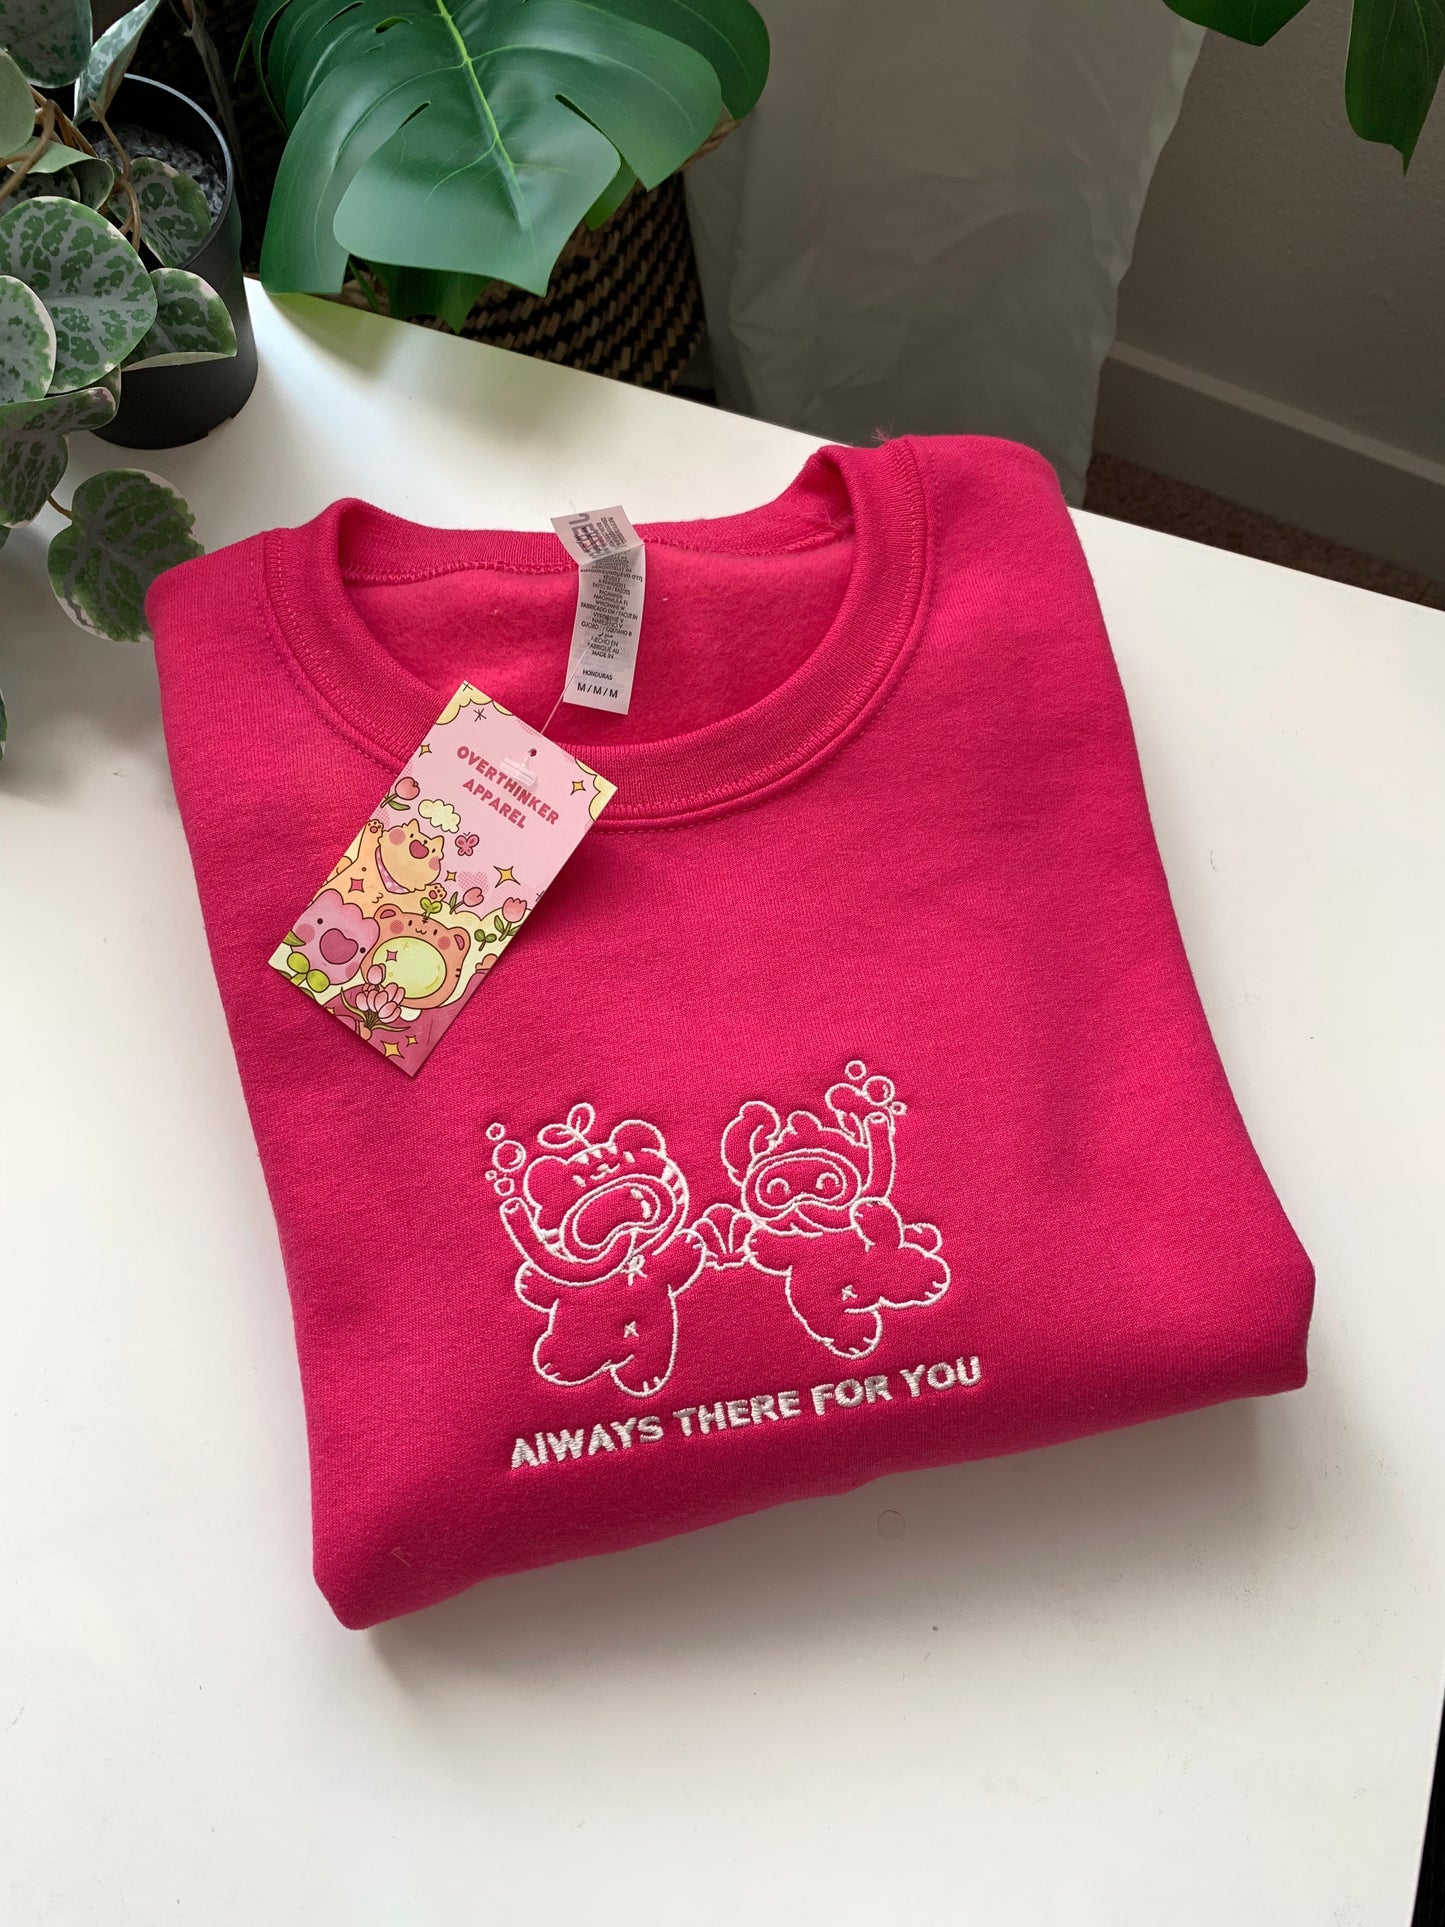 ALWAYS THERE FOR YOU Embroidery Crewneck Sweatshirt